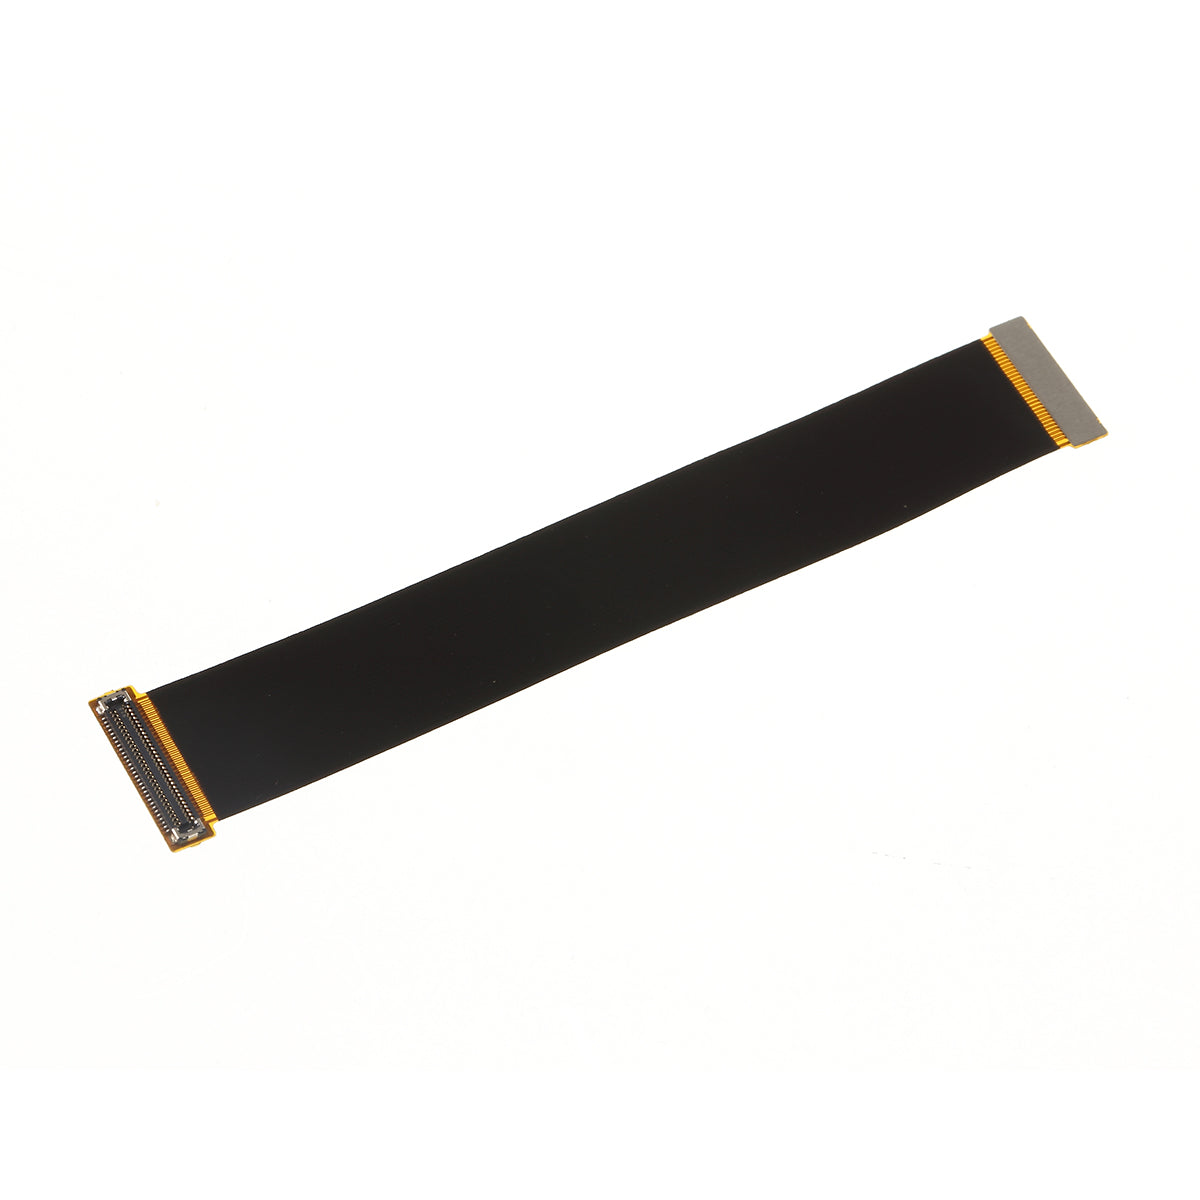 Extended Tester Testing Flex Cable for Huawei P20 Pro / Mate 20 Pro